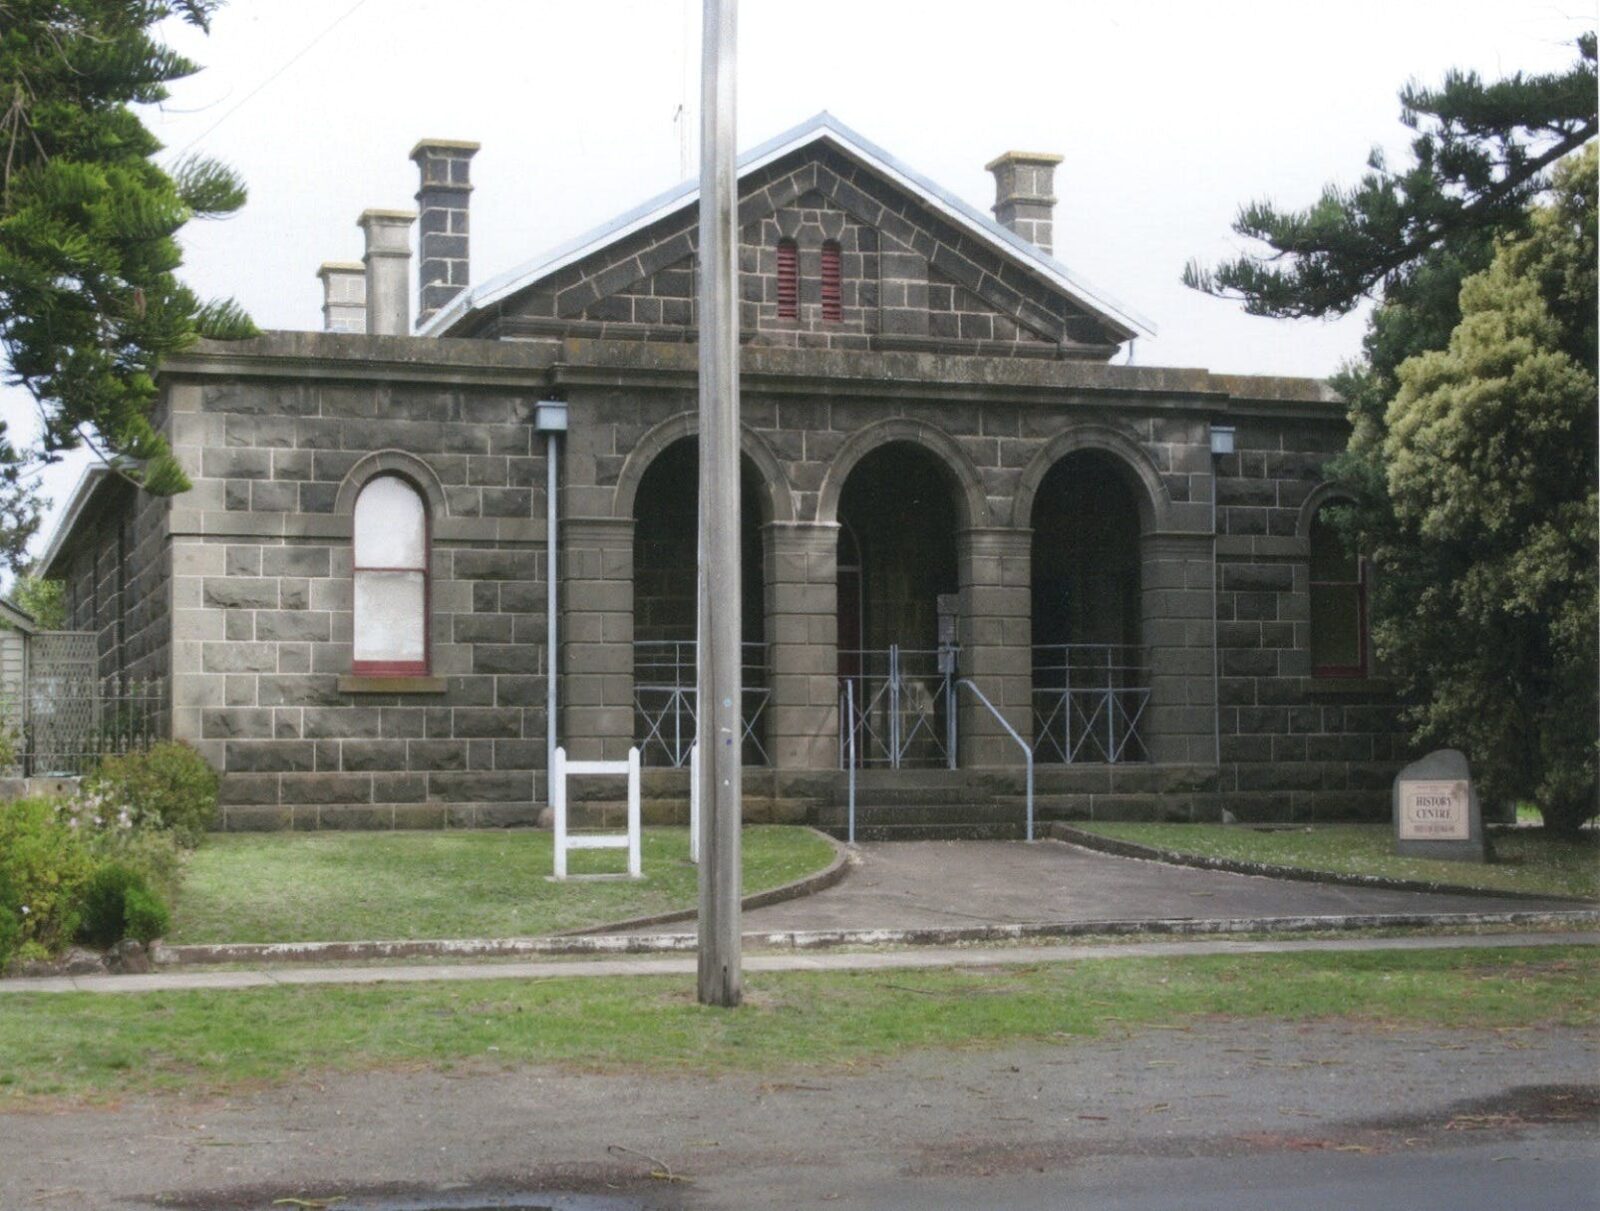 Bluestone building with a 3 arched porch